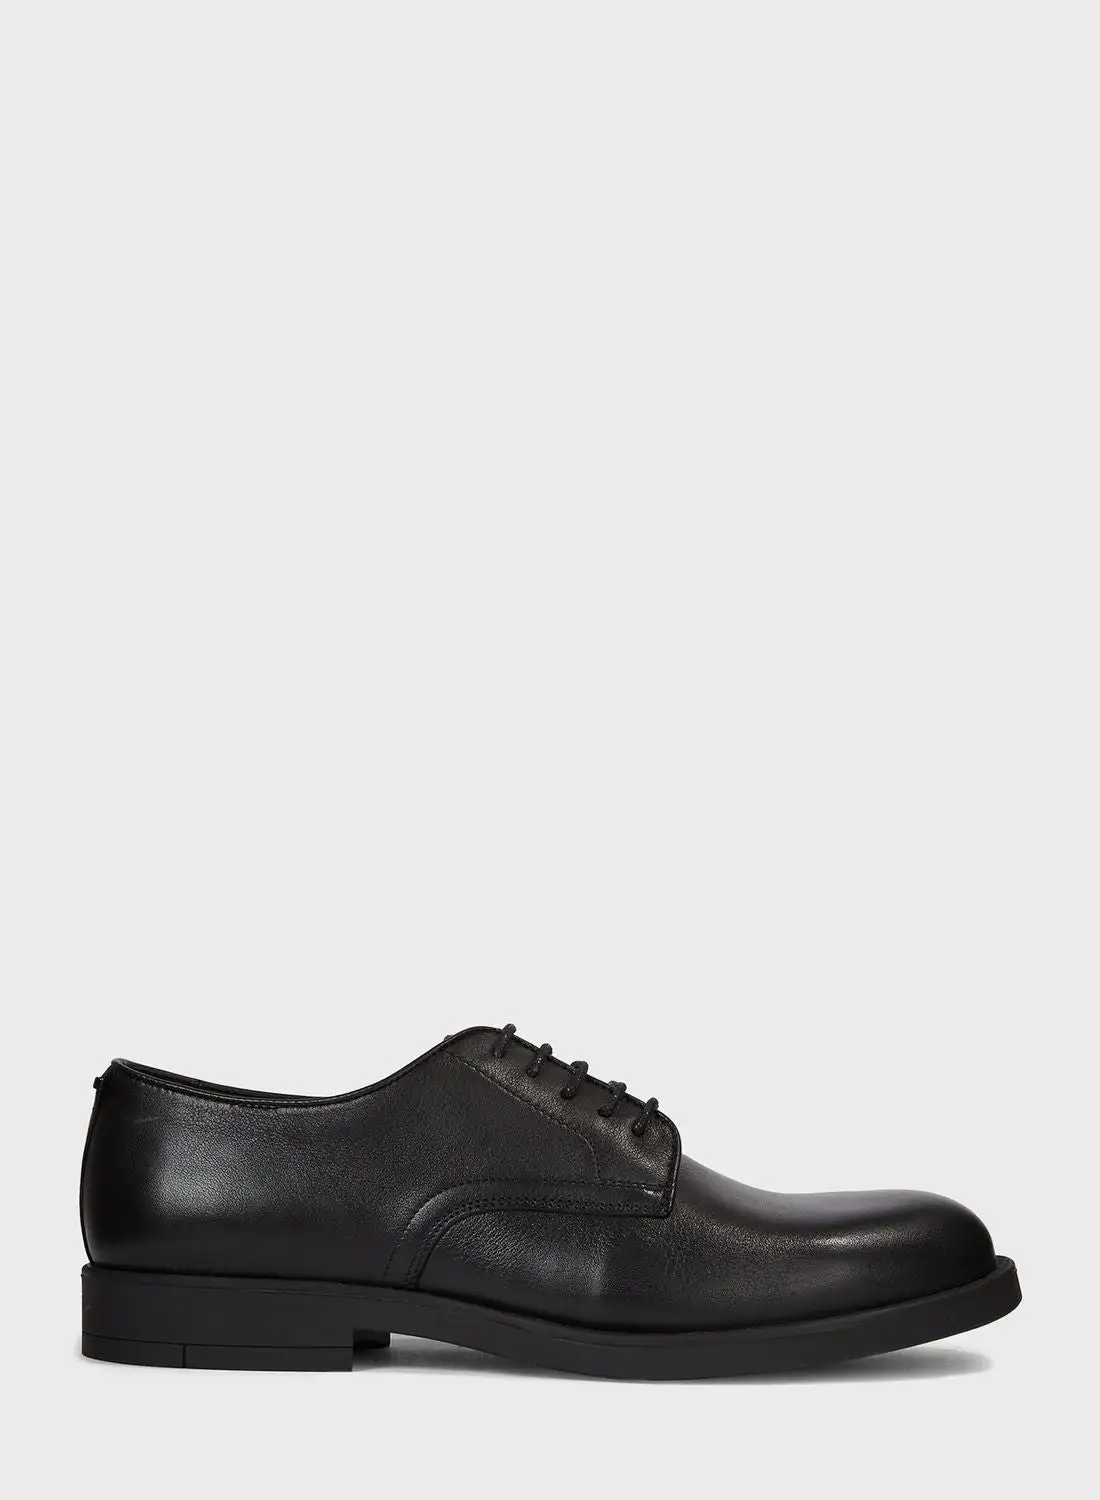 CALVIN KLEIN Lace Up Formal Shoes